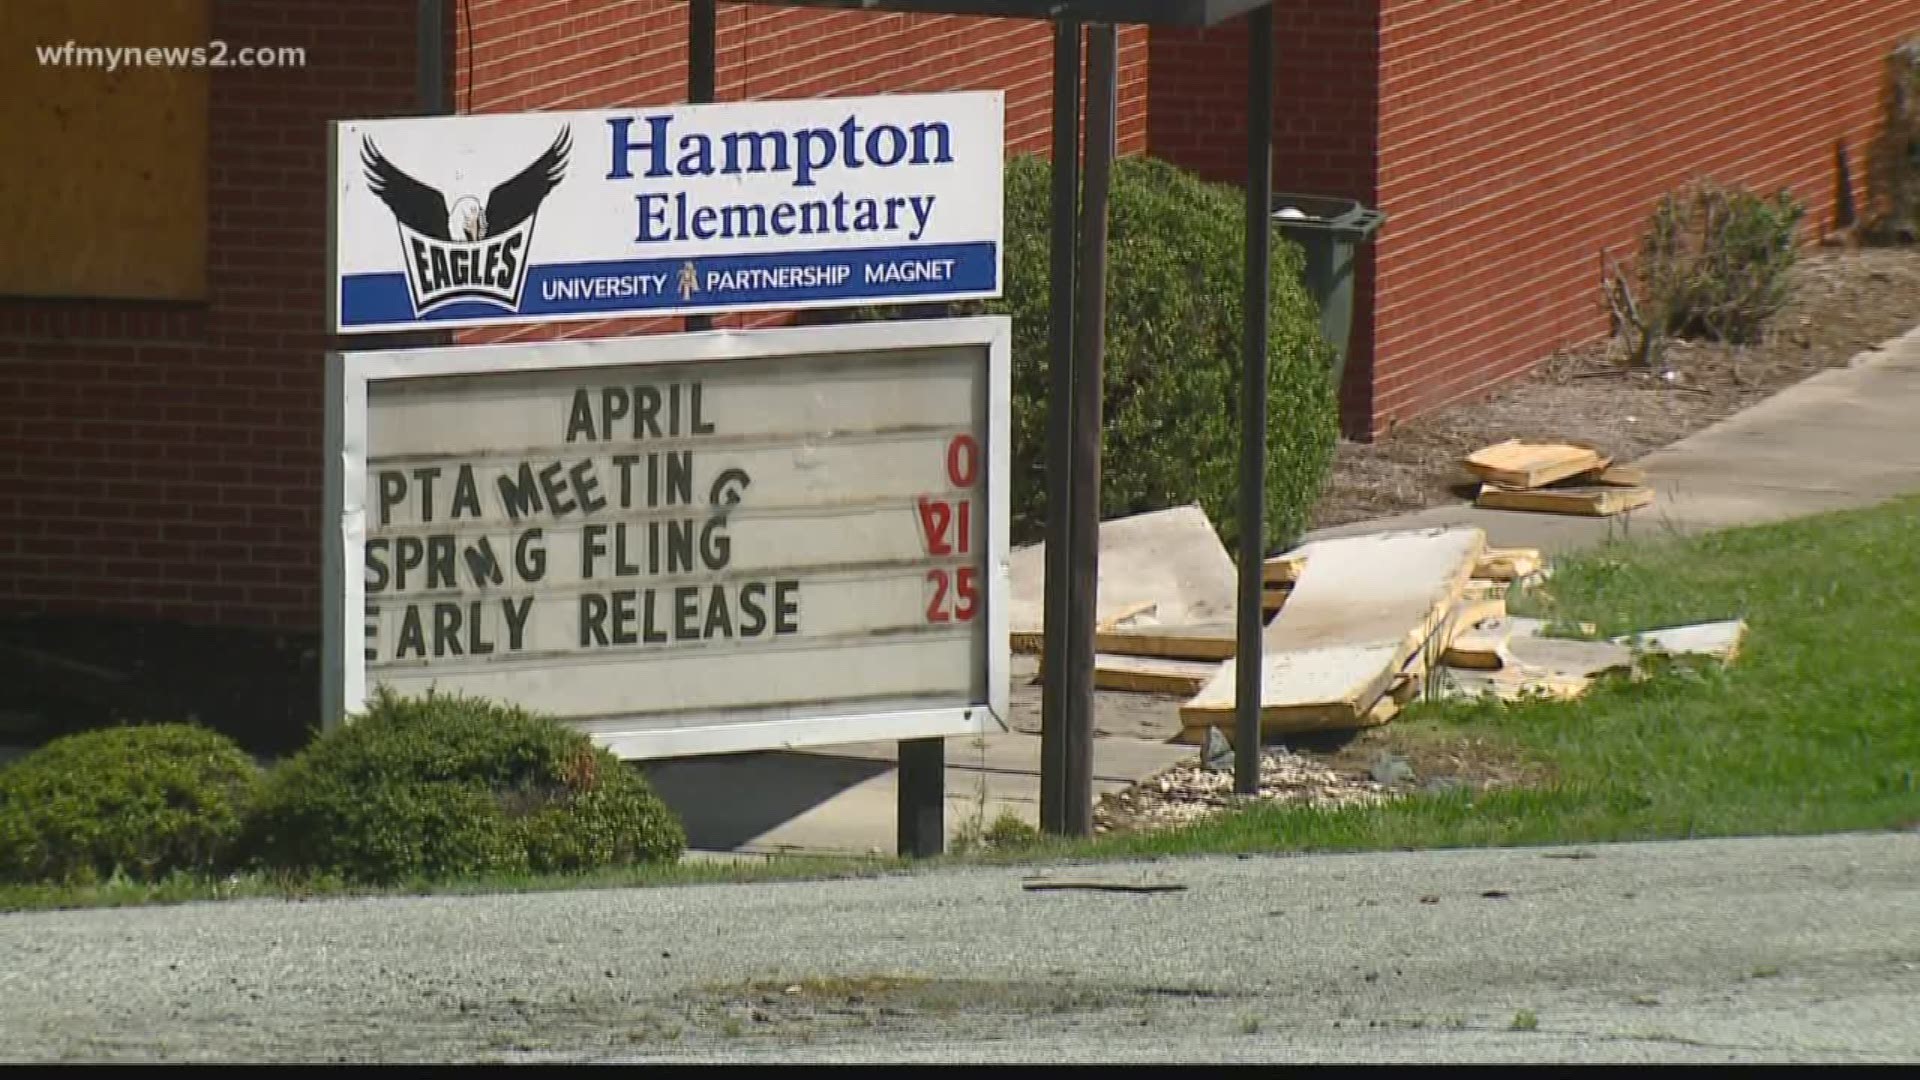 A year after a tornado did extensive damage to three schools in Greensboro, Superintendent Dr. Sharon Contreras says she's recommending Hampton elementary stays closed.